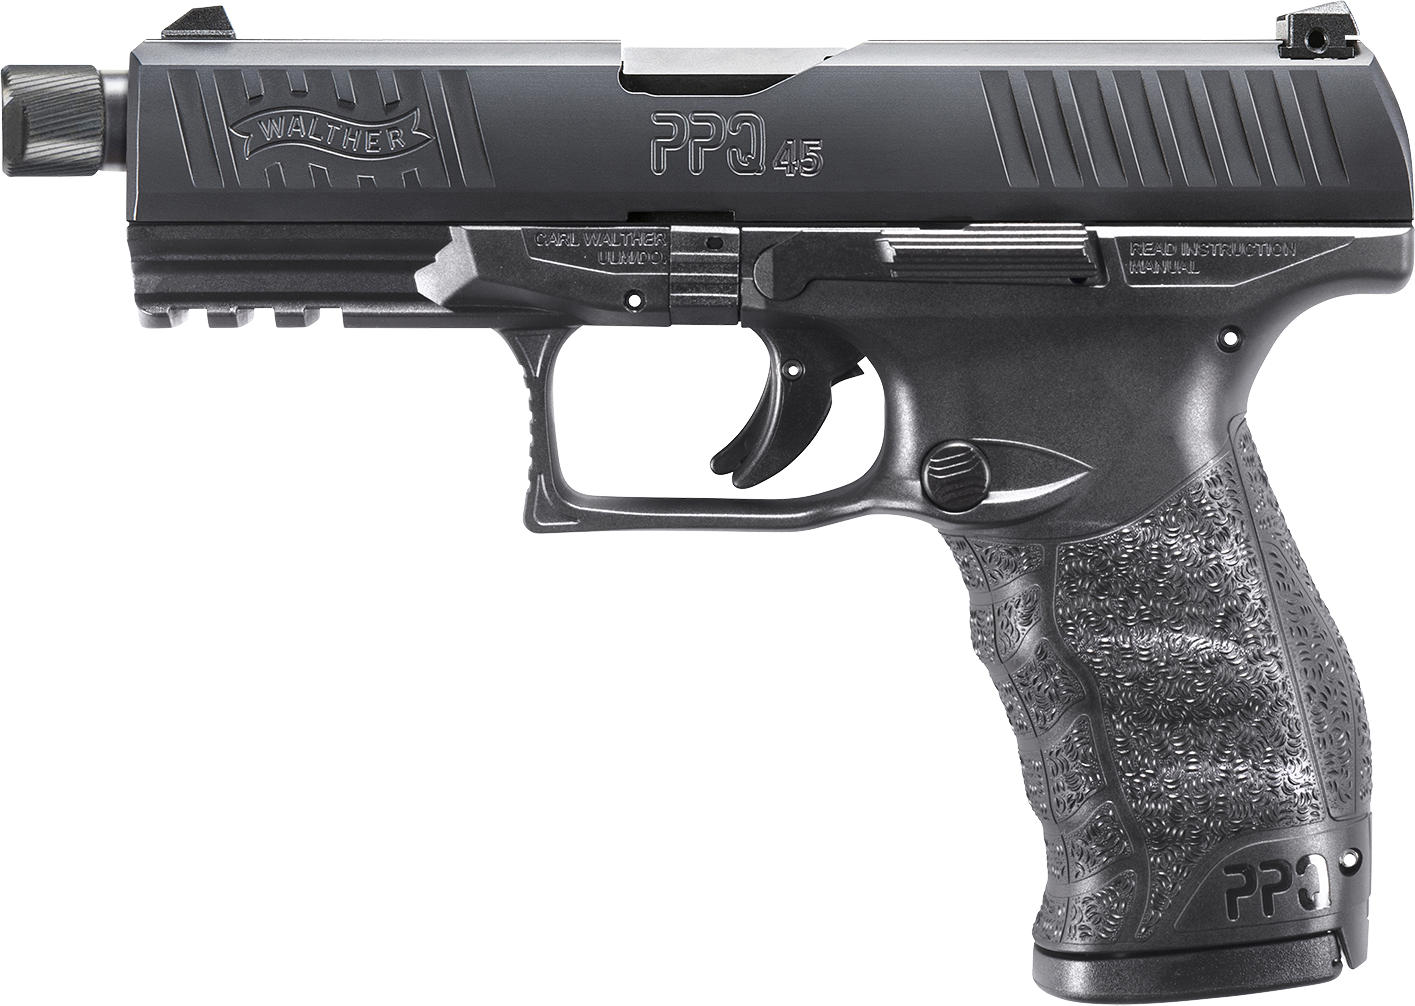 Walther PPQ 45 SD